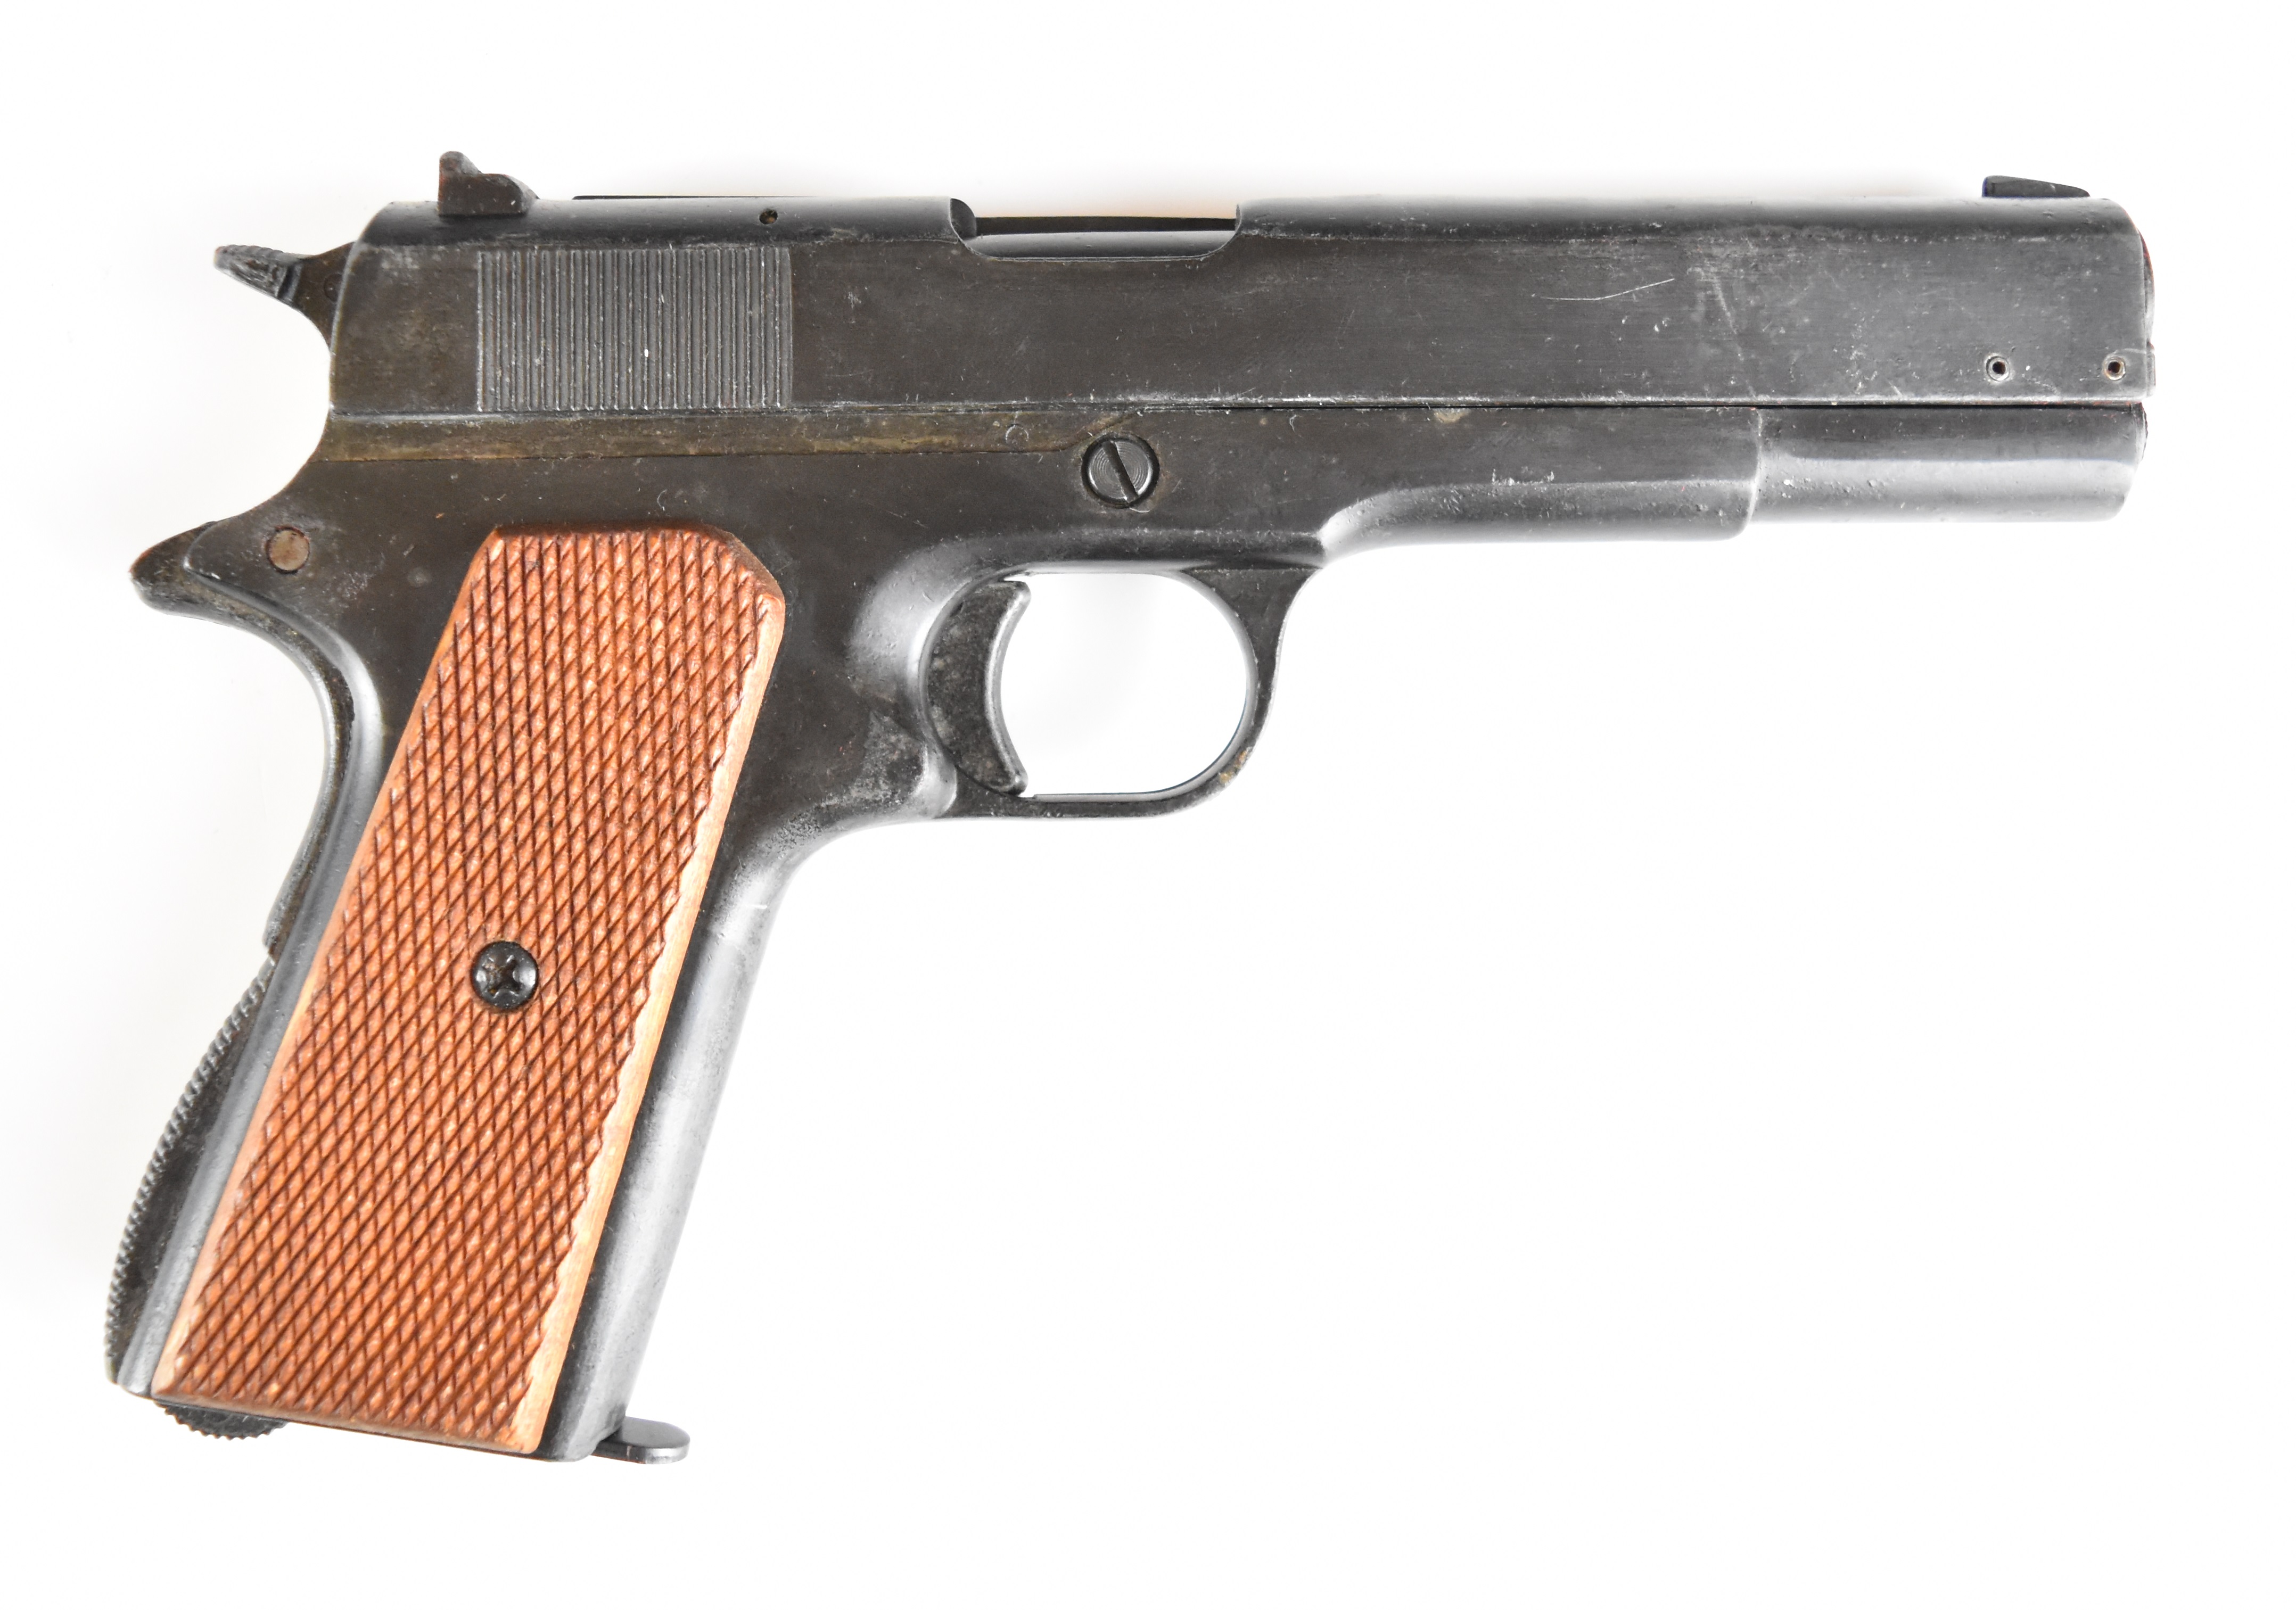 BBM Bruni 8mm blank firing pistol with chequered wooden grips, in original fitted box. - Image 2 of 14